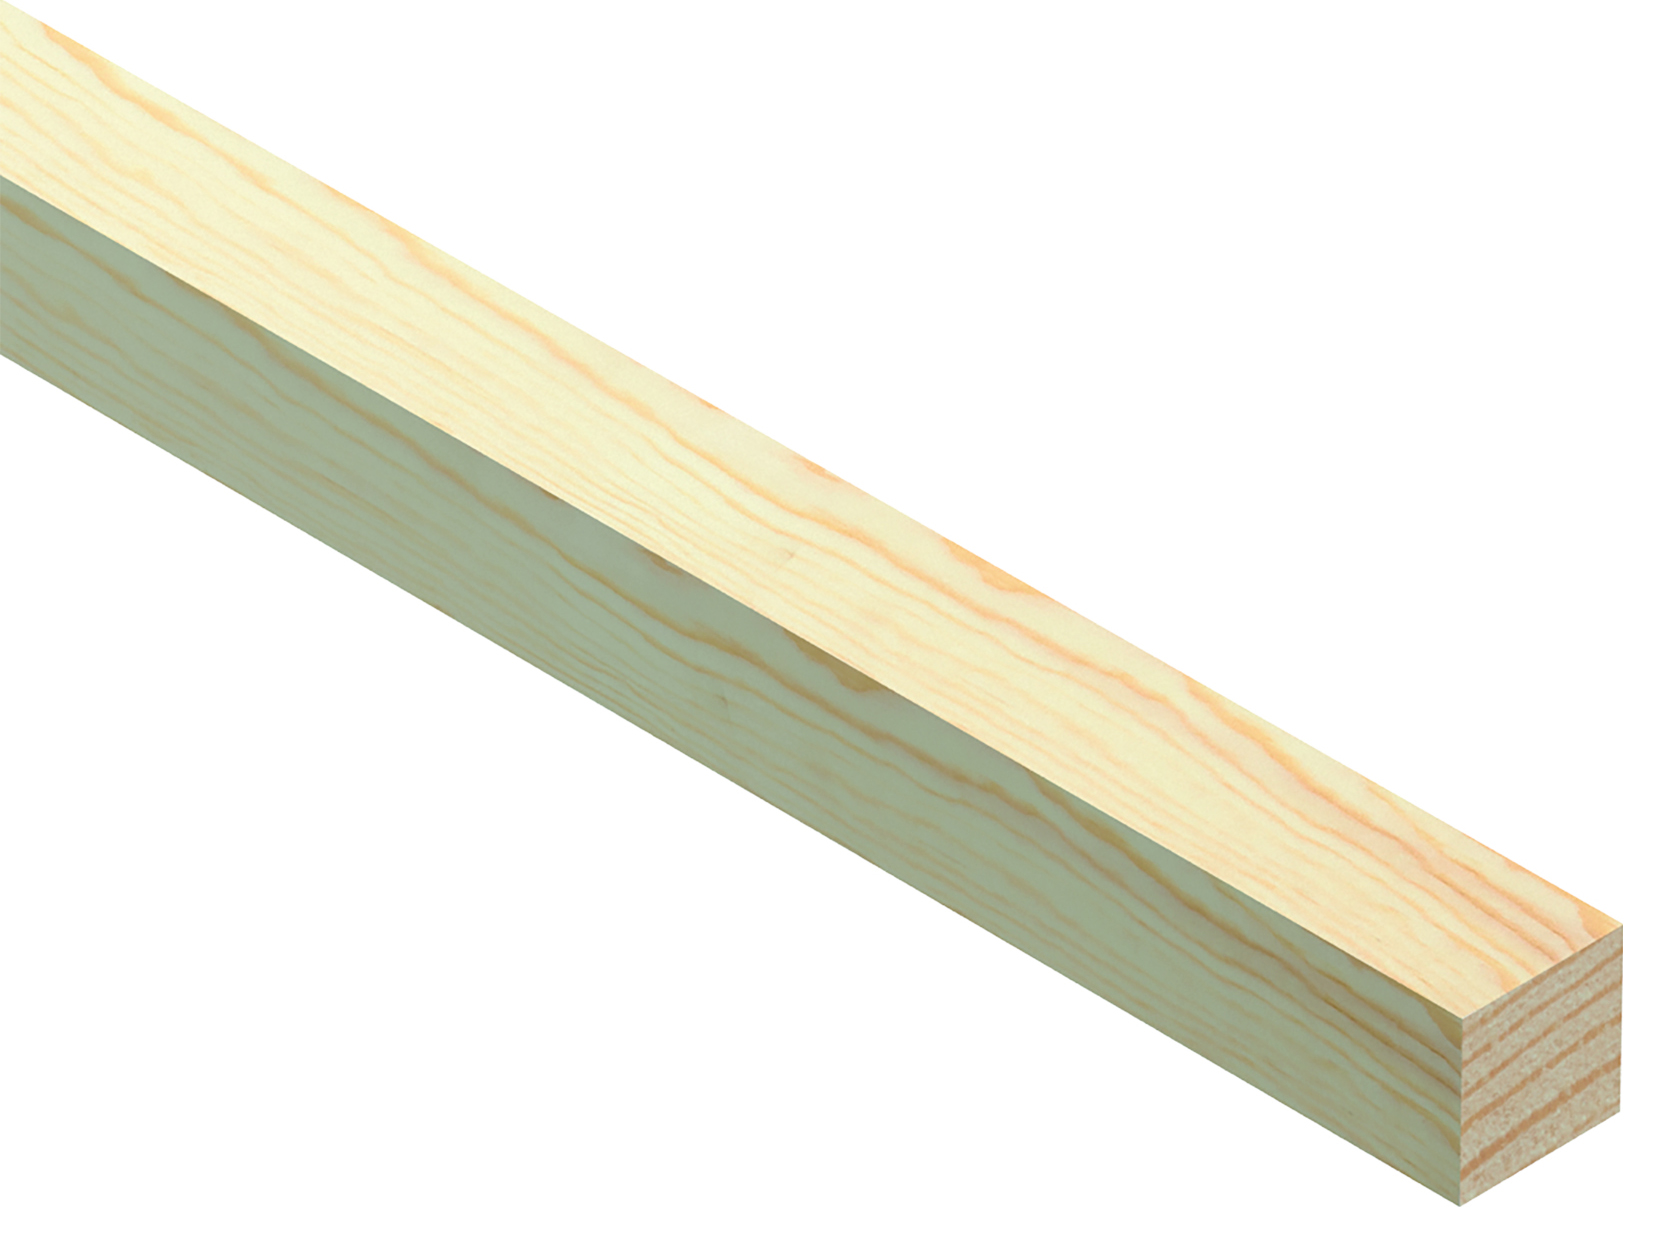 Image of Cheshire Mouldings Pine Stripwood - 8 x 8 x 2400mm